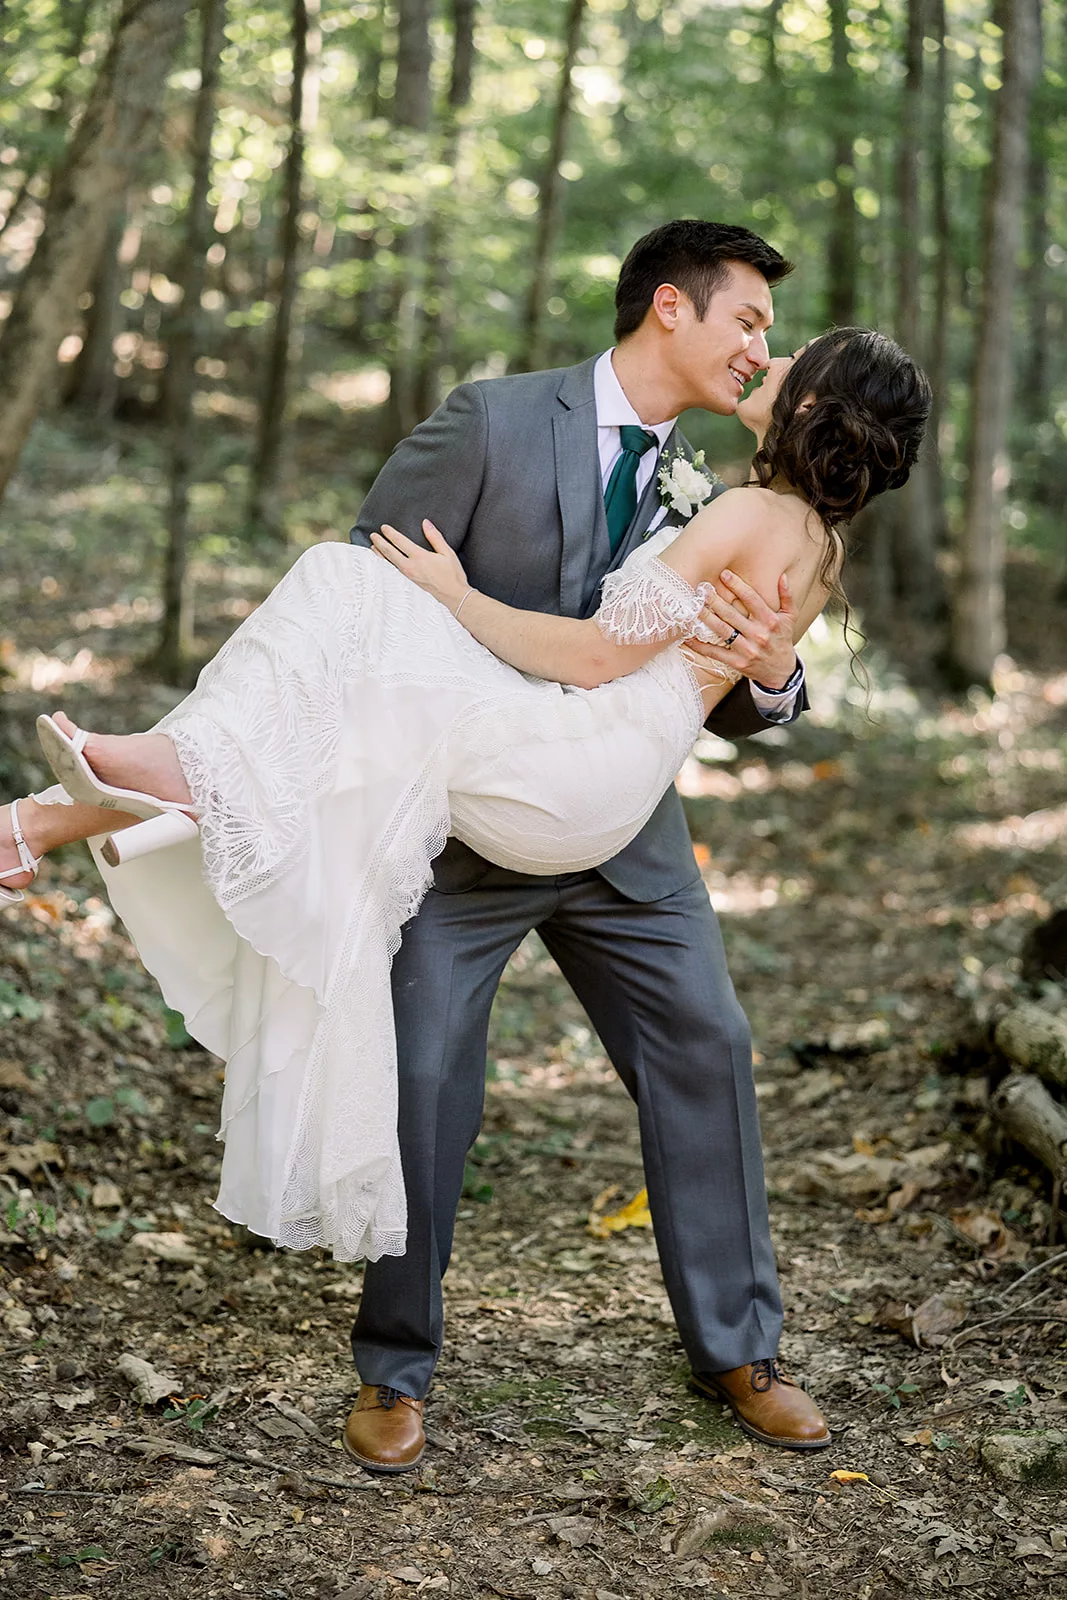 A groom lifts his bride and leans in for a kiss in the woods at a Sustainable Wedding Venue